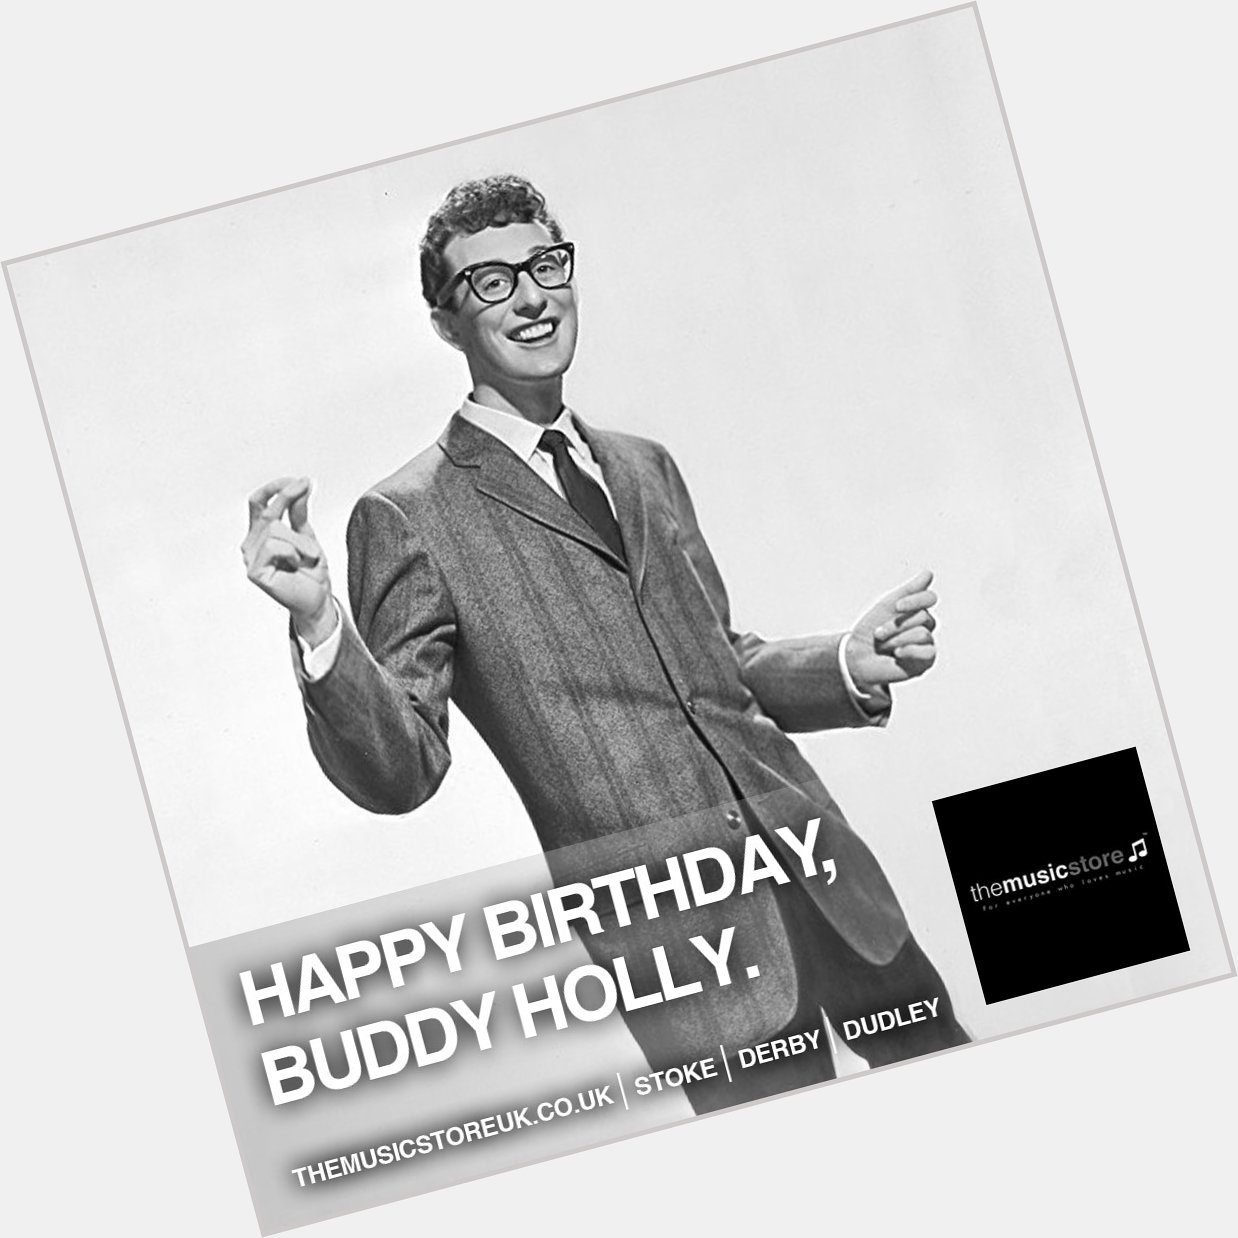 Buddy Holly would have been 81 Years Old Today. Happy Birthday, Buddy. 